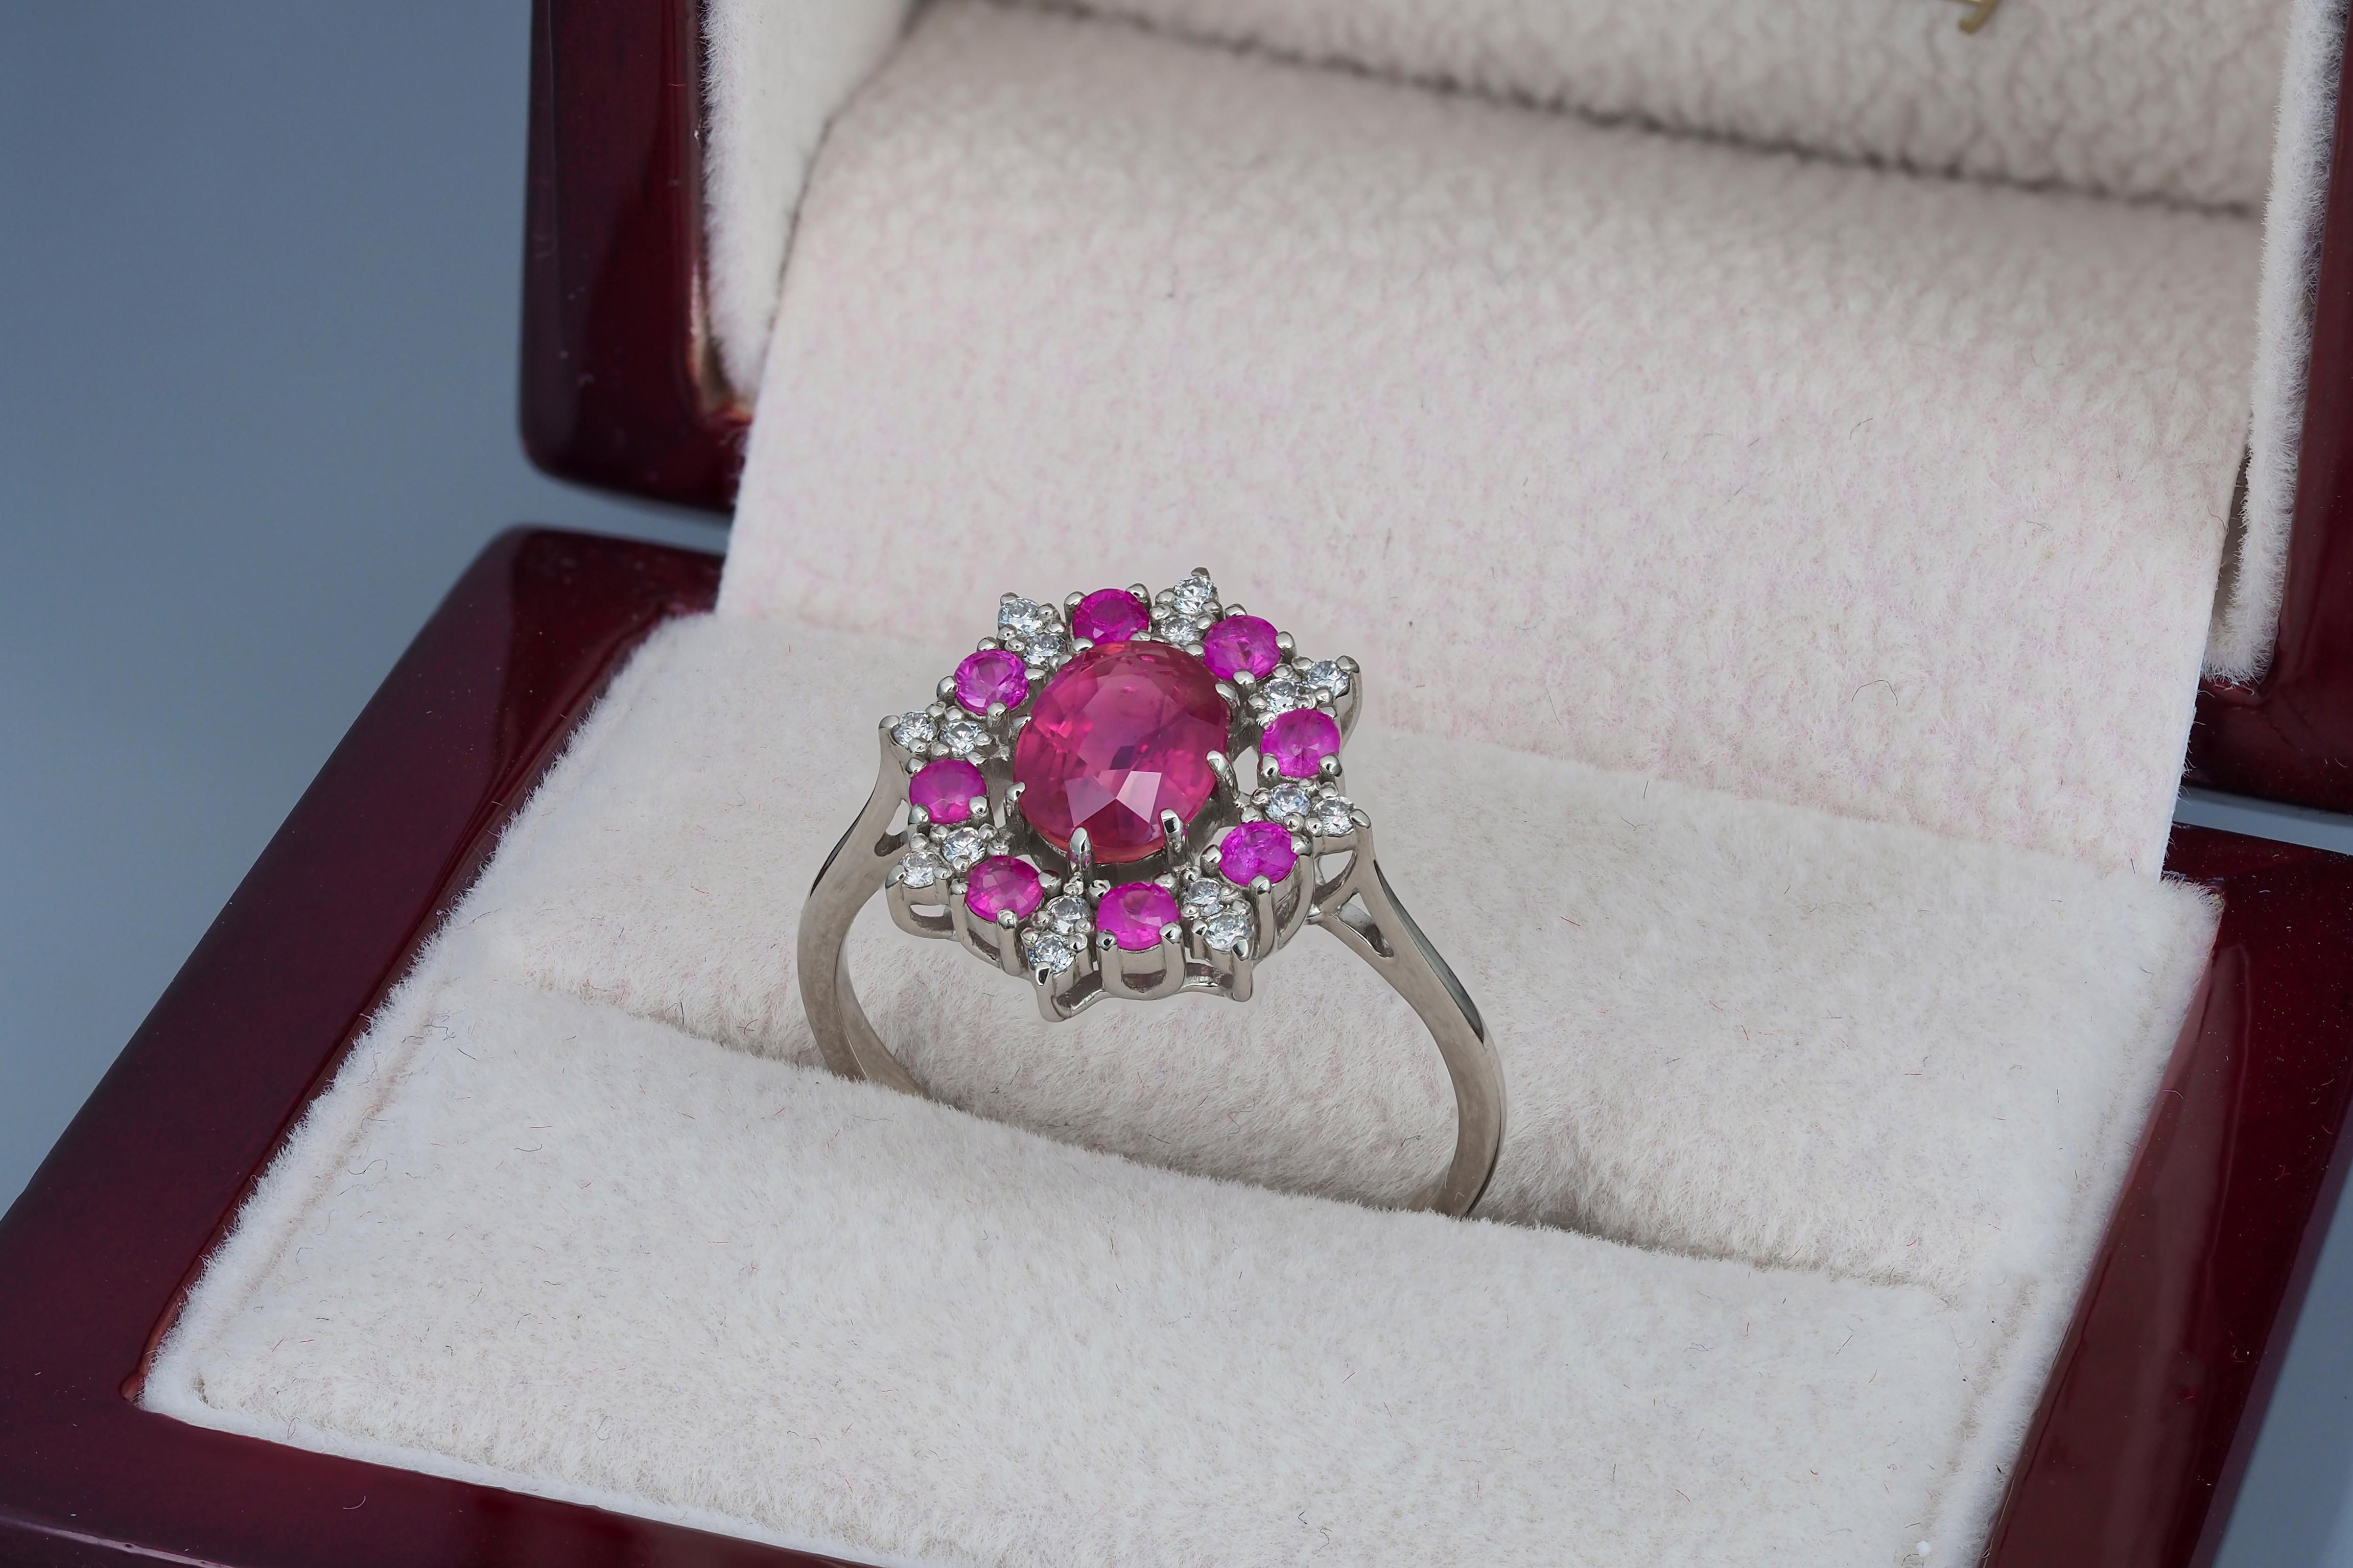 For Sale:  14 karat Gold Ring with Ruby and Diamonds. Snowflake Gold Ring 8